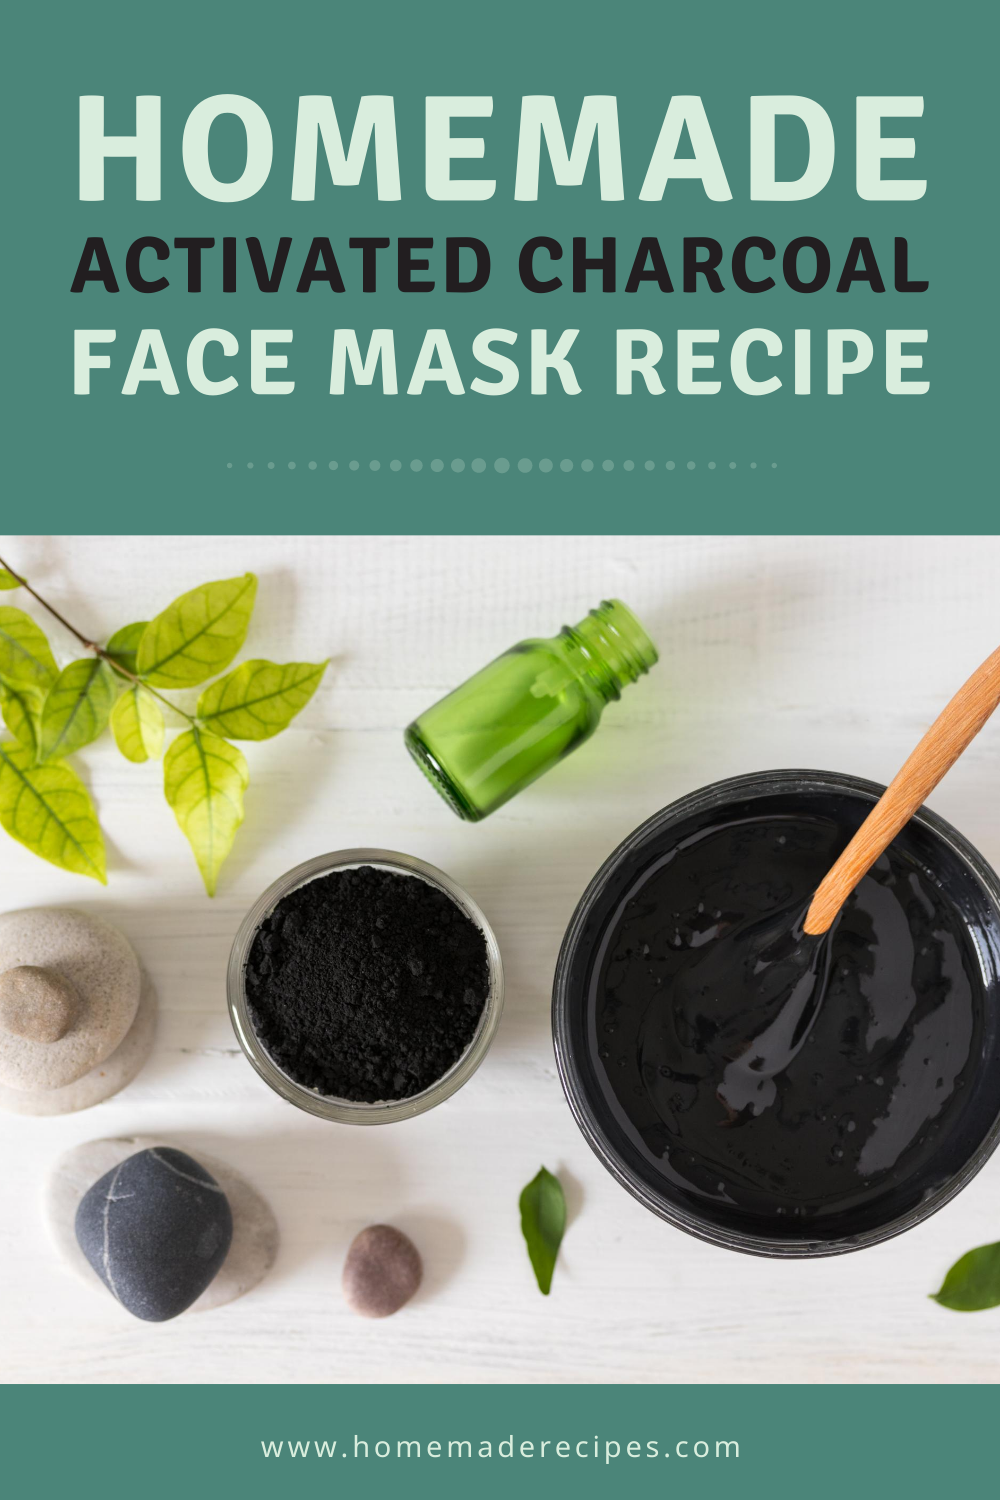 placard | what to do after charcoal mask